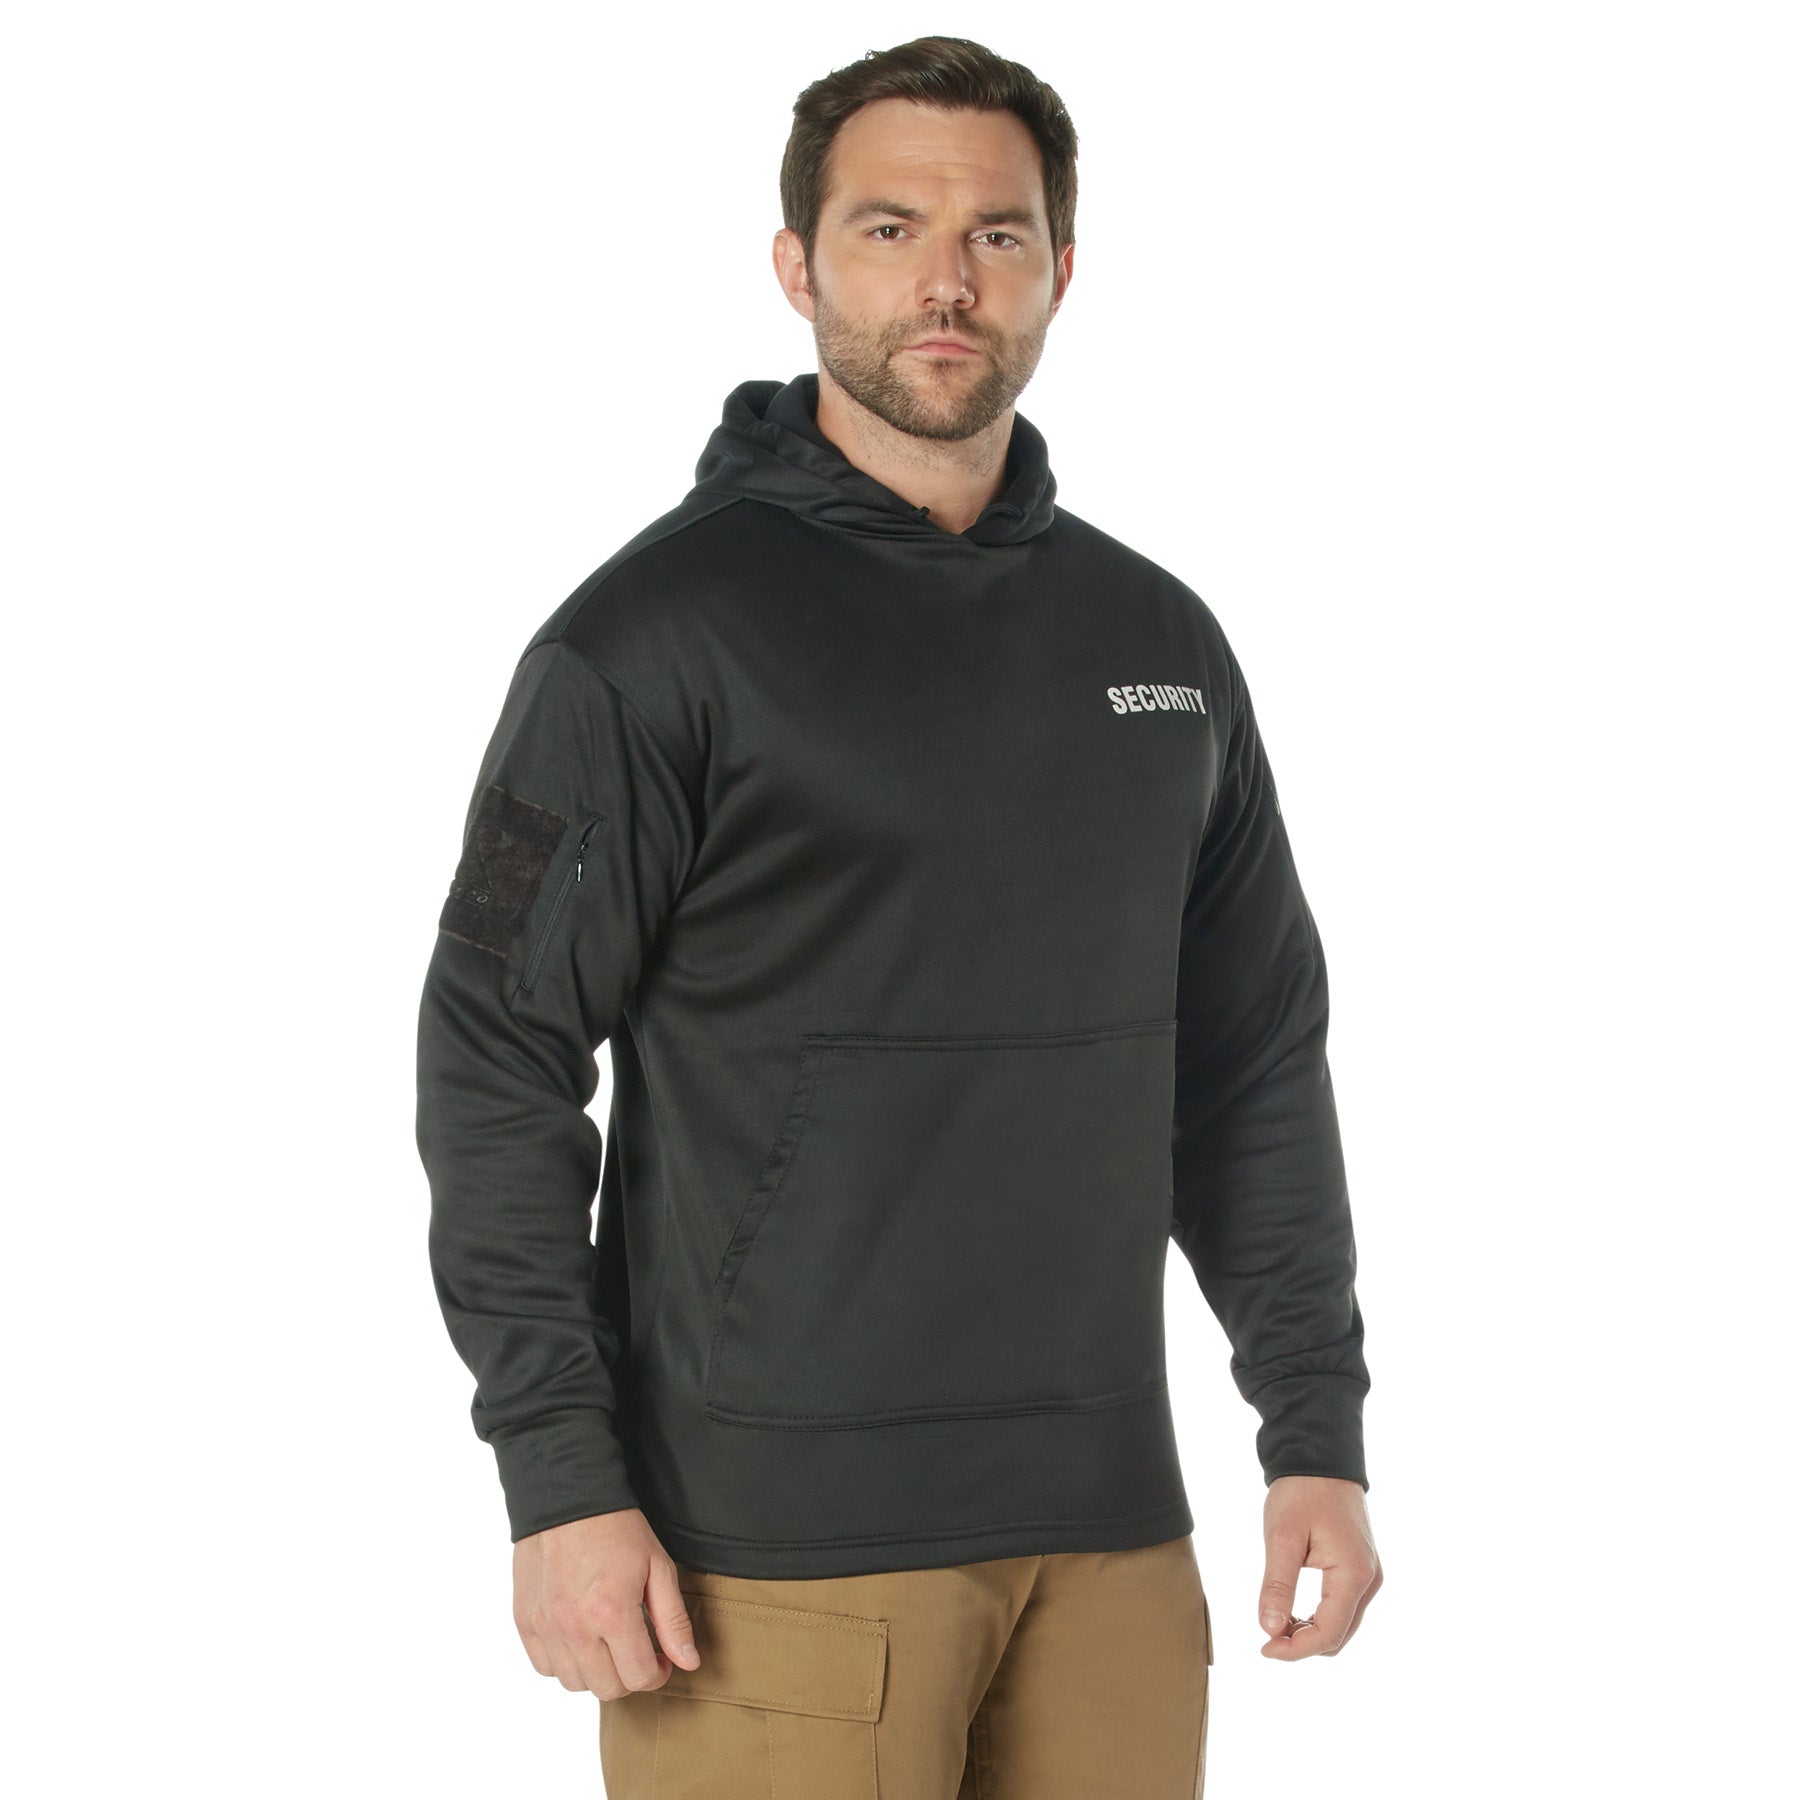 [Public Safety] Poly Security Concealed Carry Hooded Sweatshirts